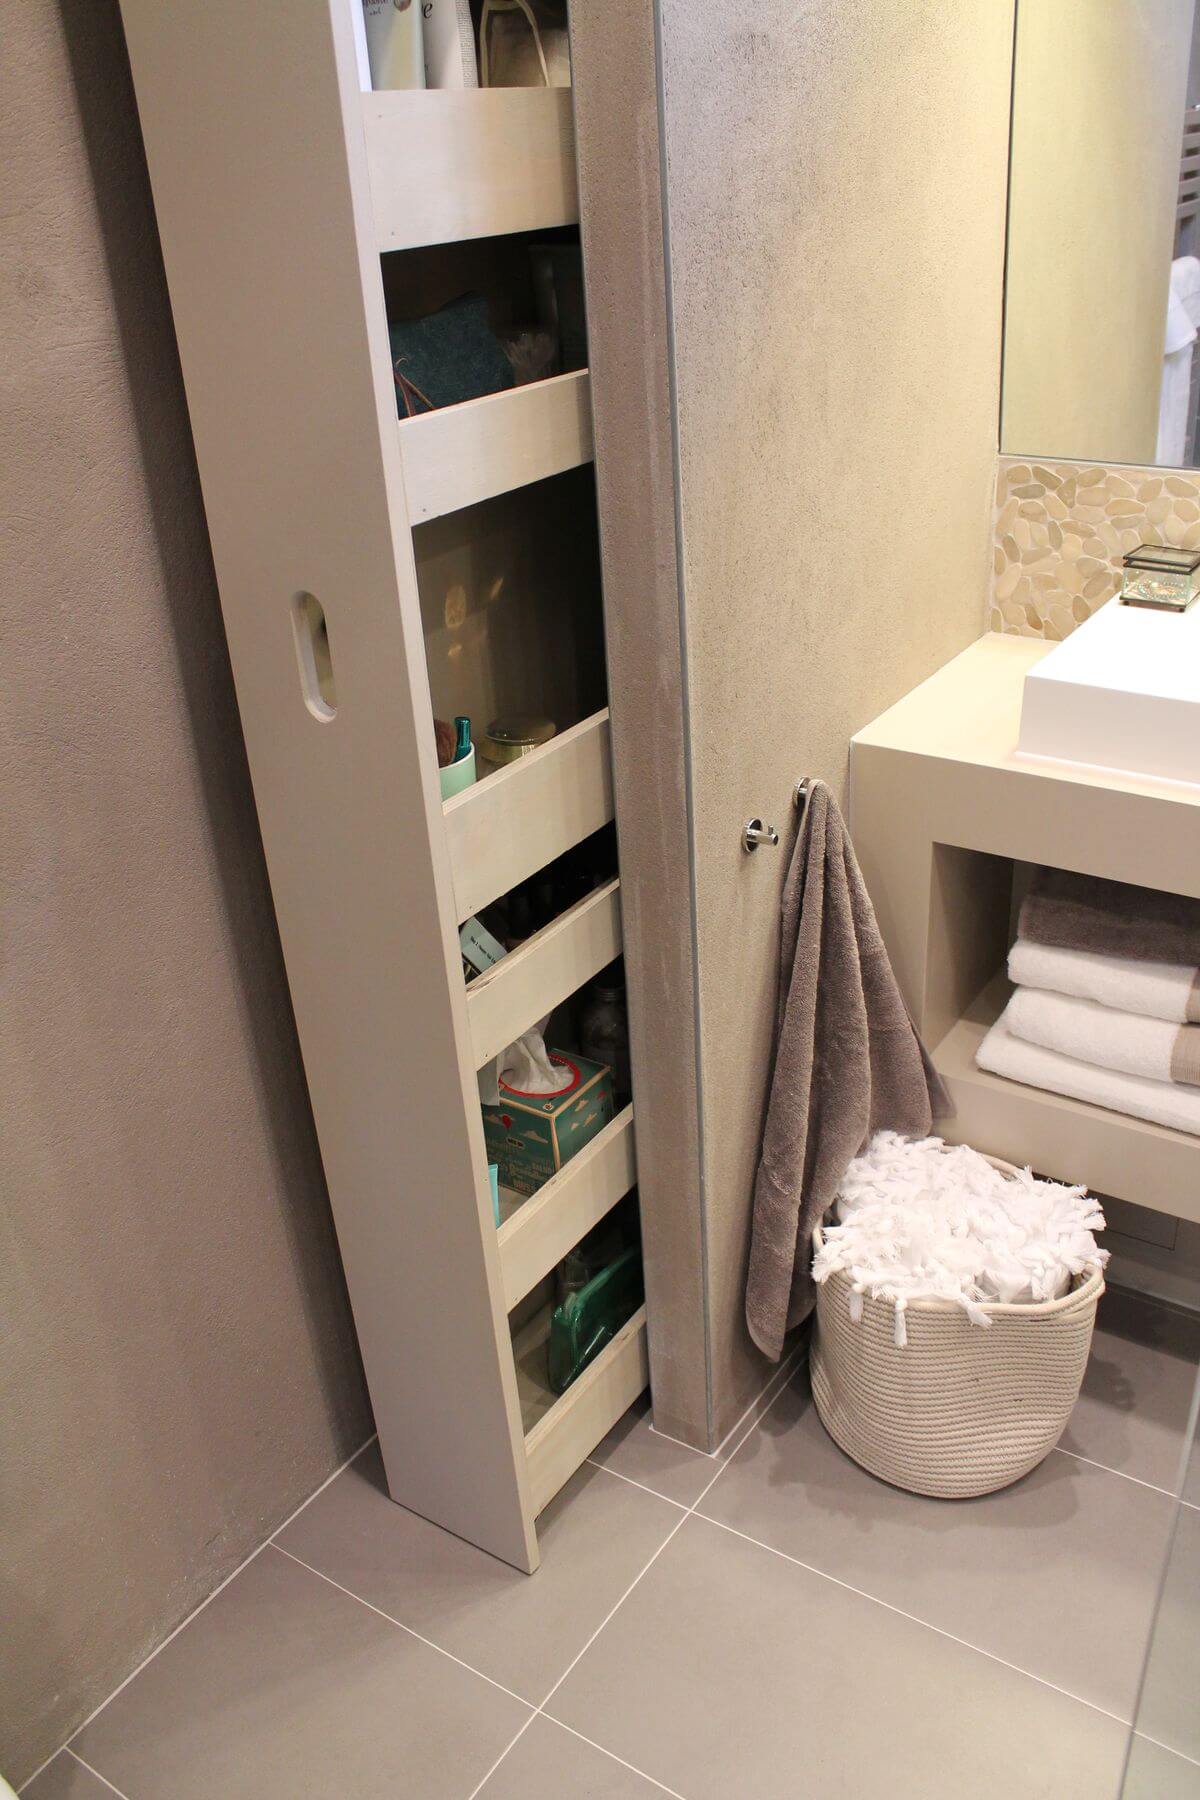 Sliding Storage Space for Stowing Bathroom Necessities